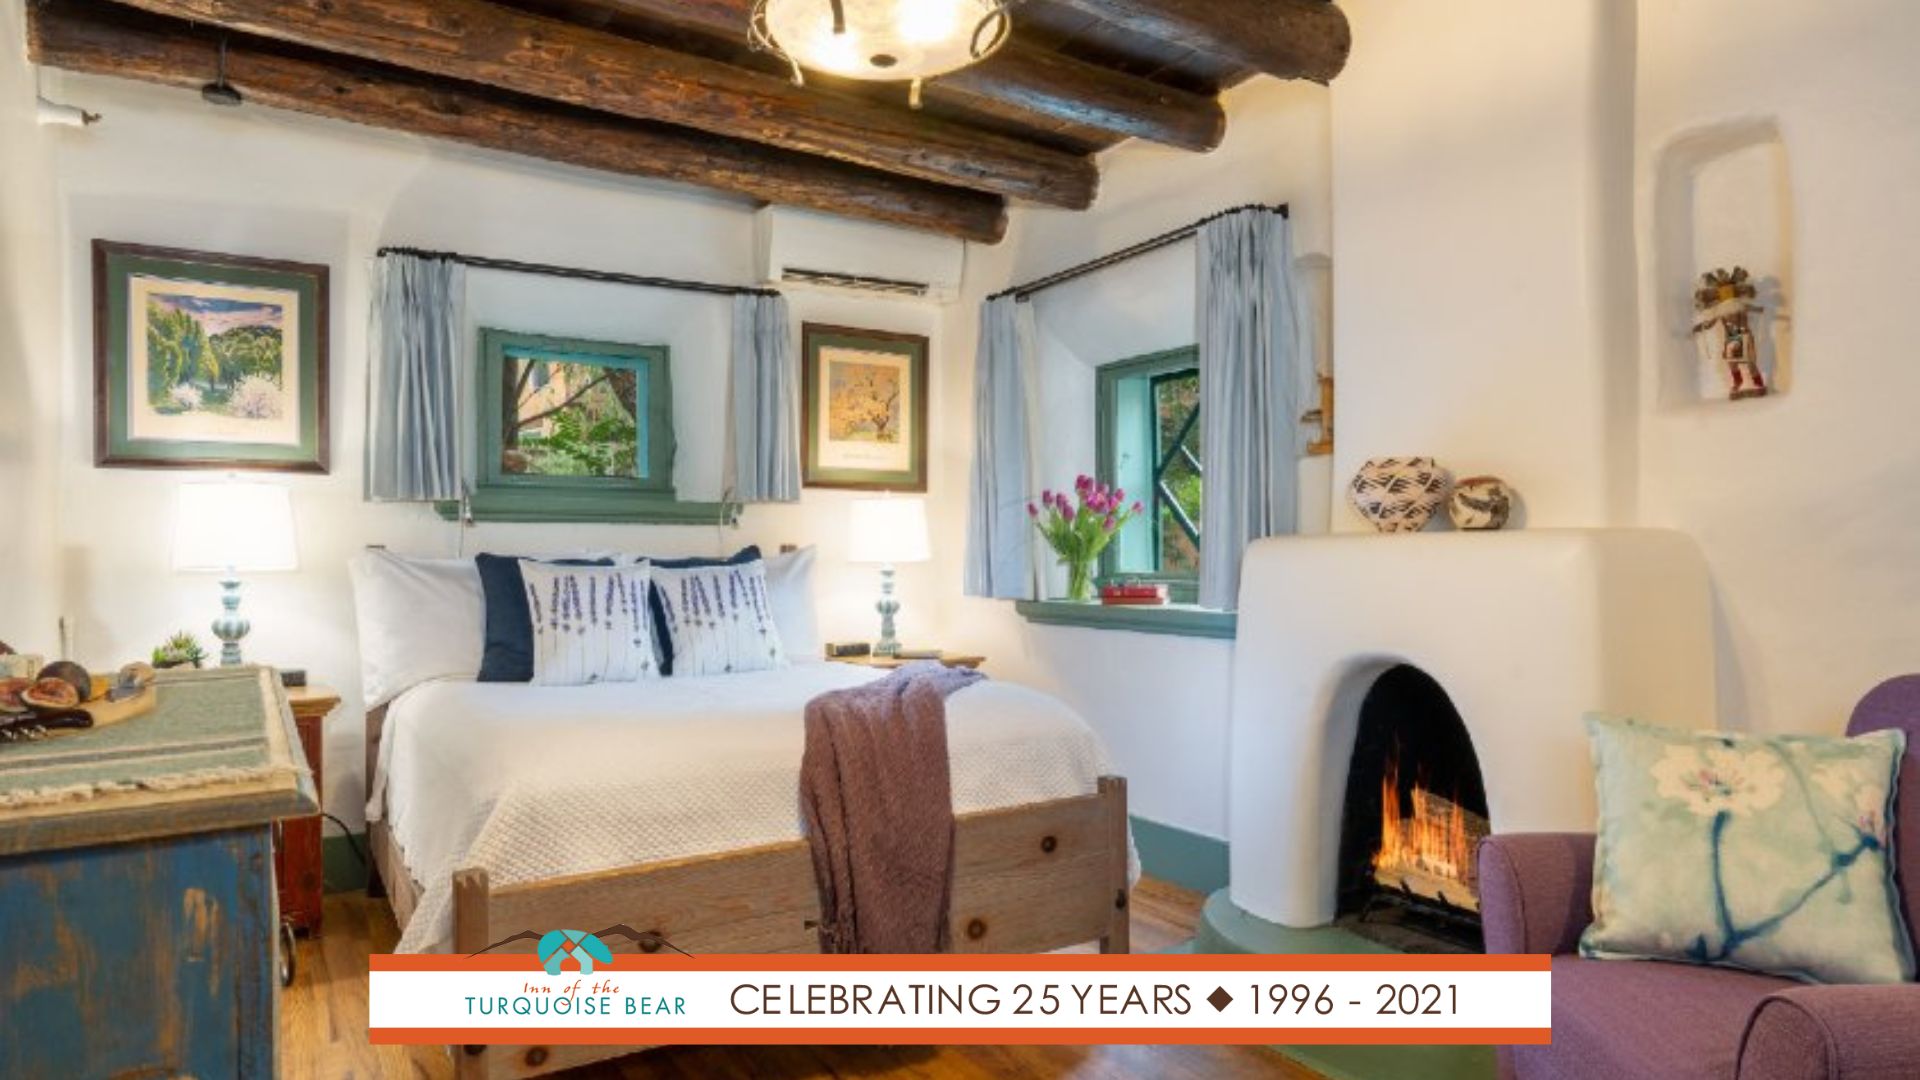 Creamy white guest room with wood beams, wood floors, Kiva fireplace, and beautiful art.